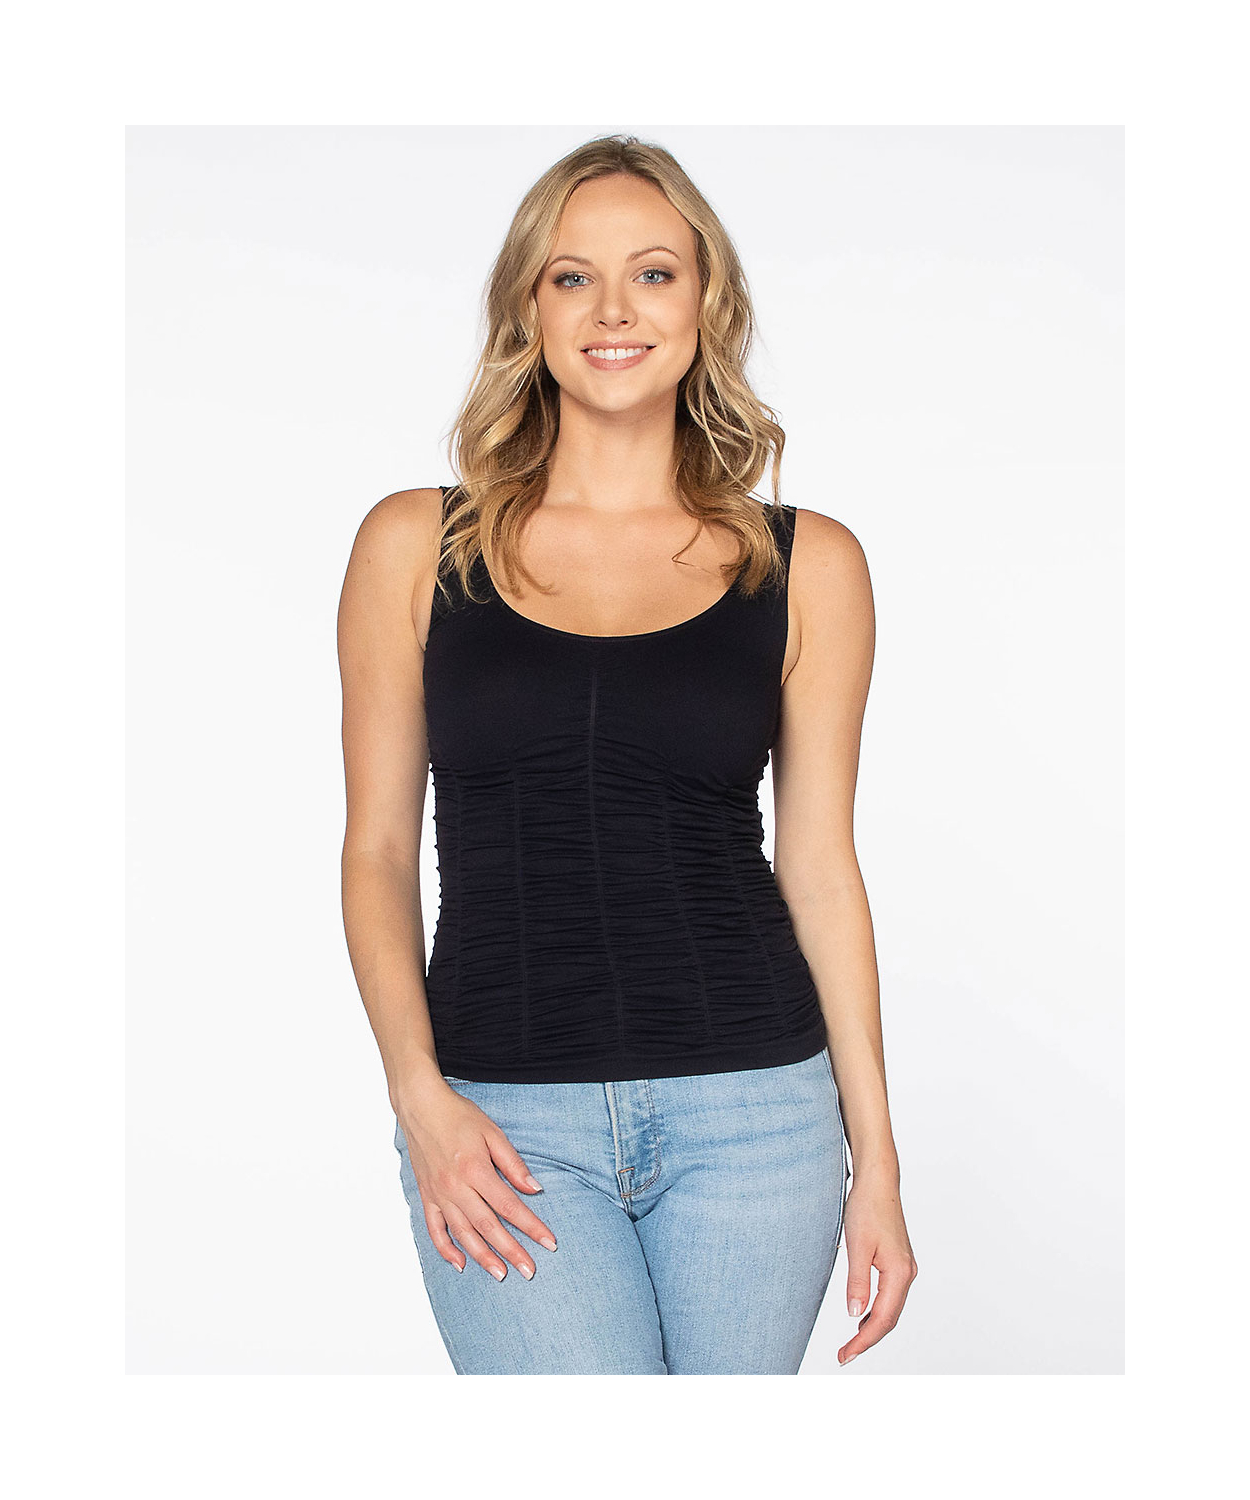 https://lasttango.us/media/catalog/product/cache/58bcfb769cf3247e0aad1ee16b65d108/a/l/all-over-ruched-tank-1177-black-_1__1.jpg